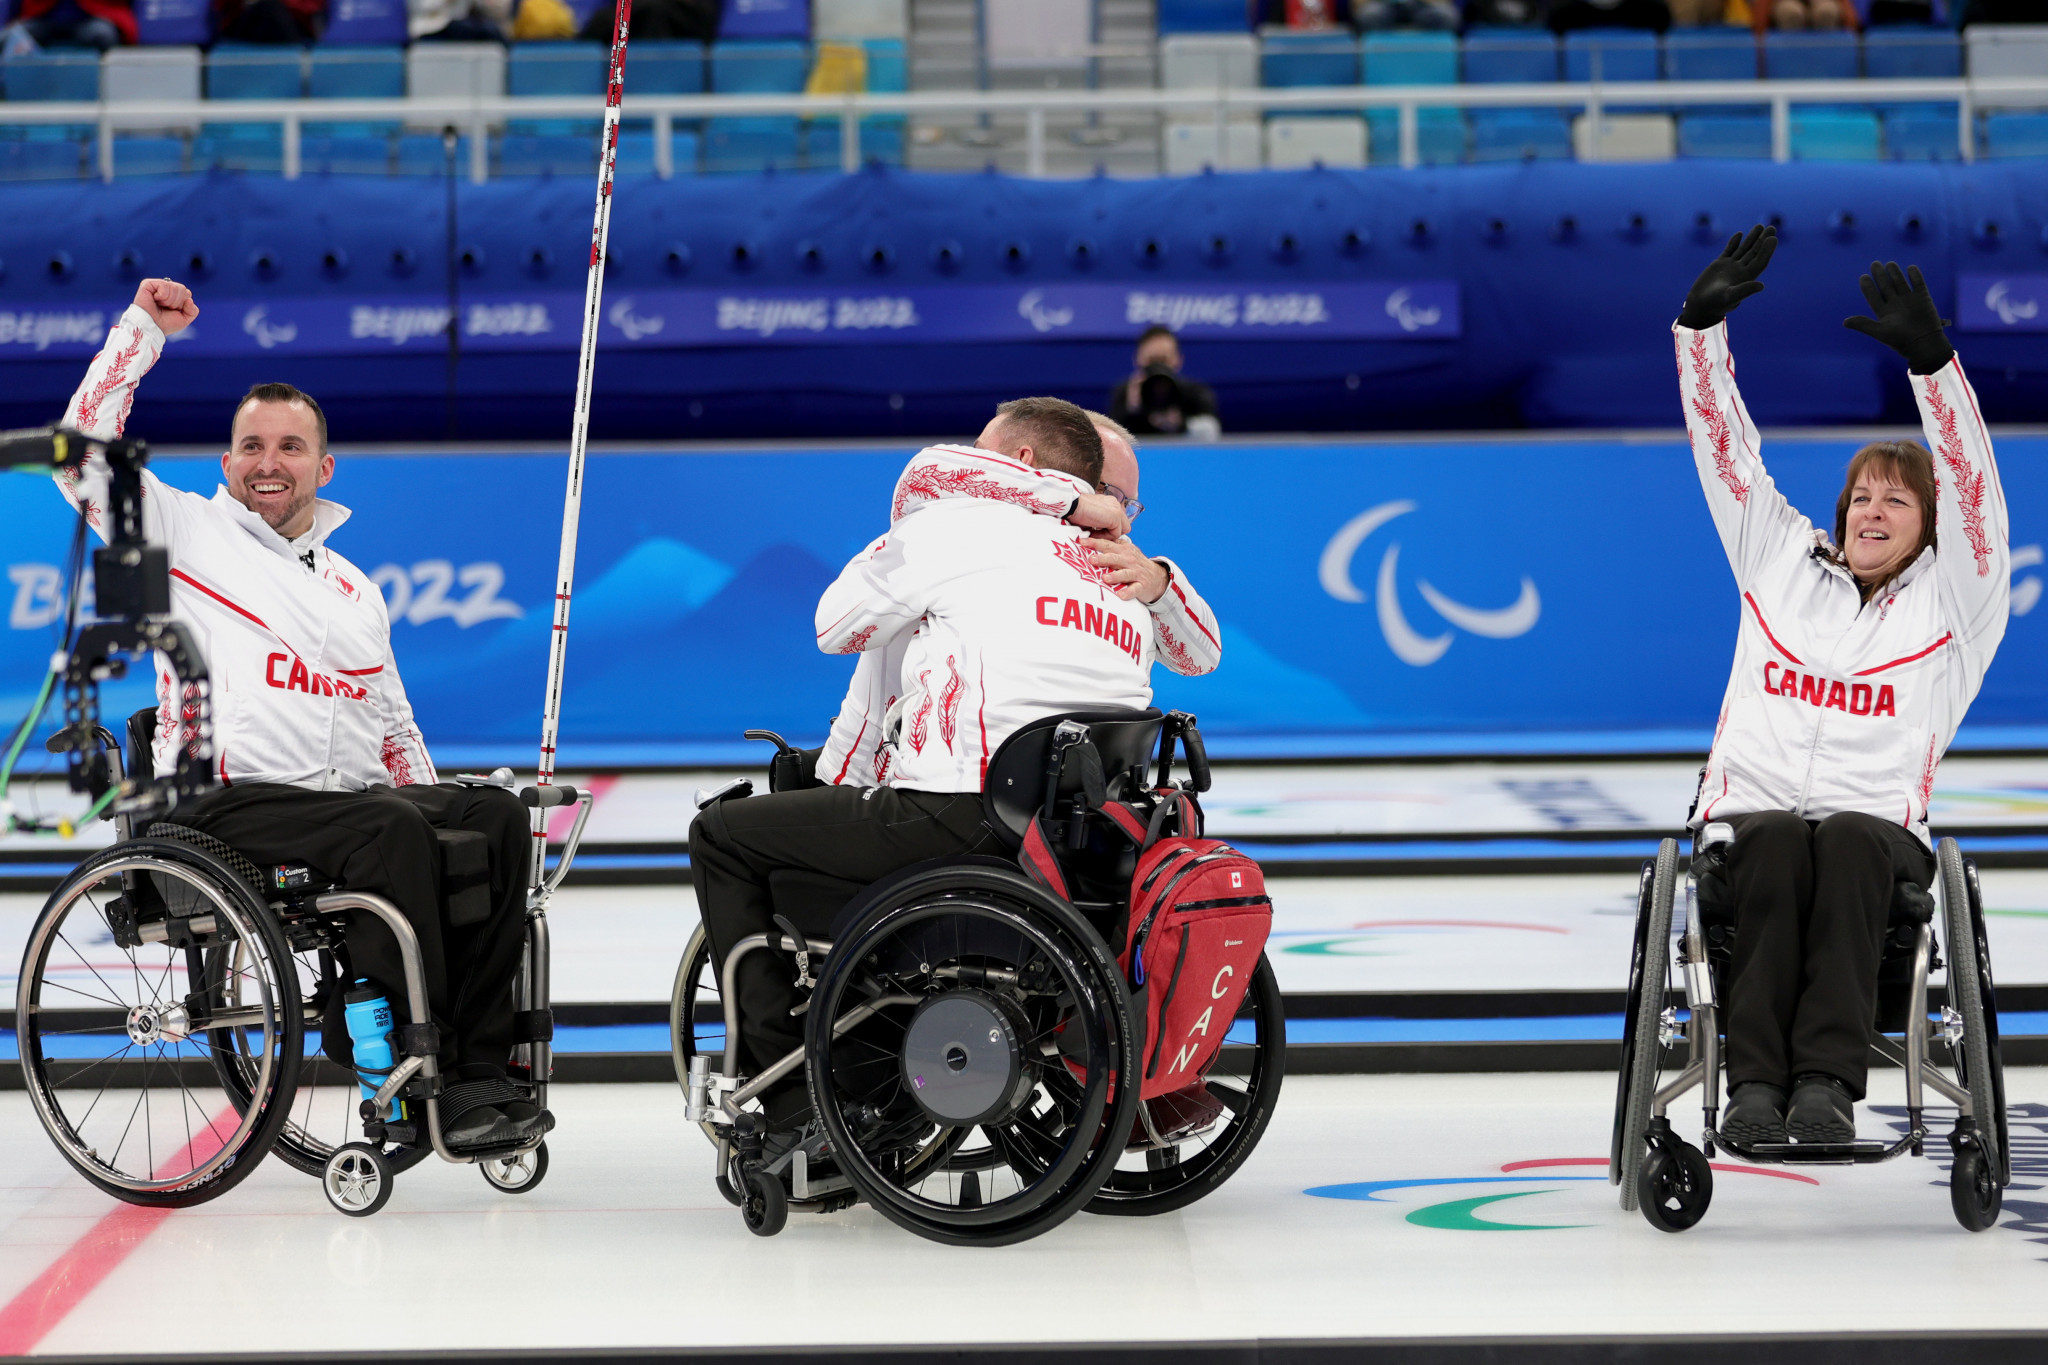 China and Sweden to meet in wheelchair curling final, Canada retain bronze